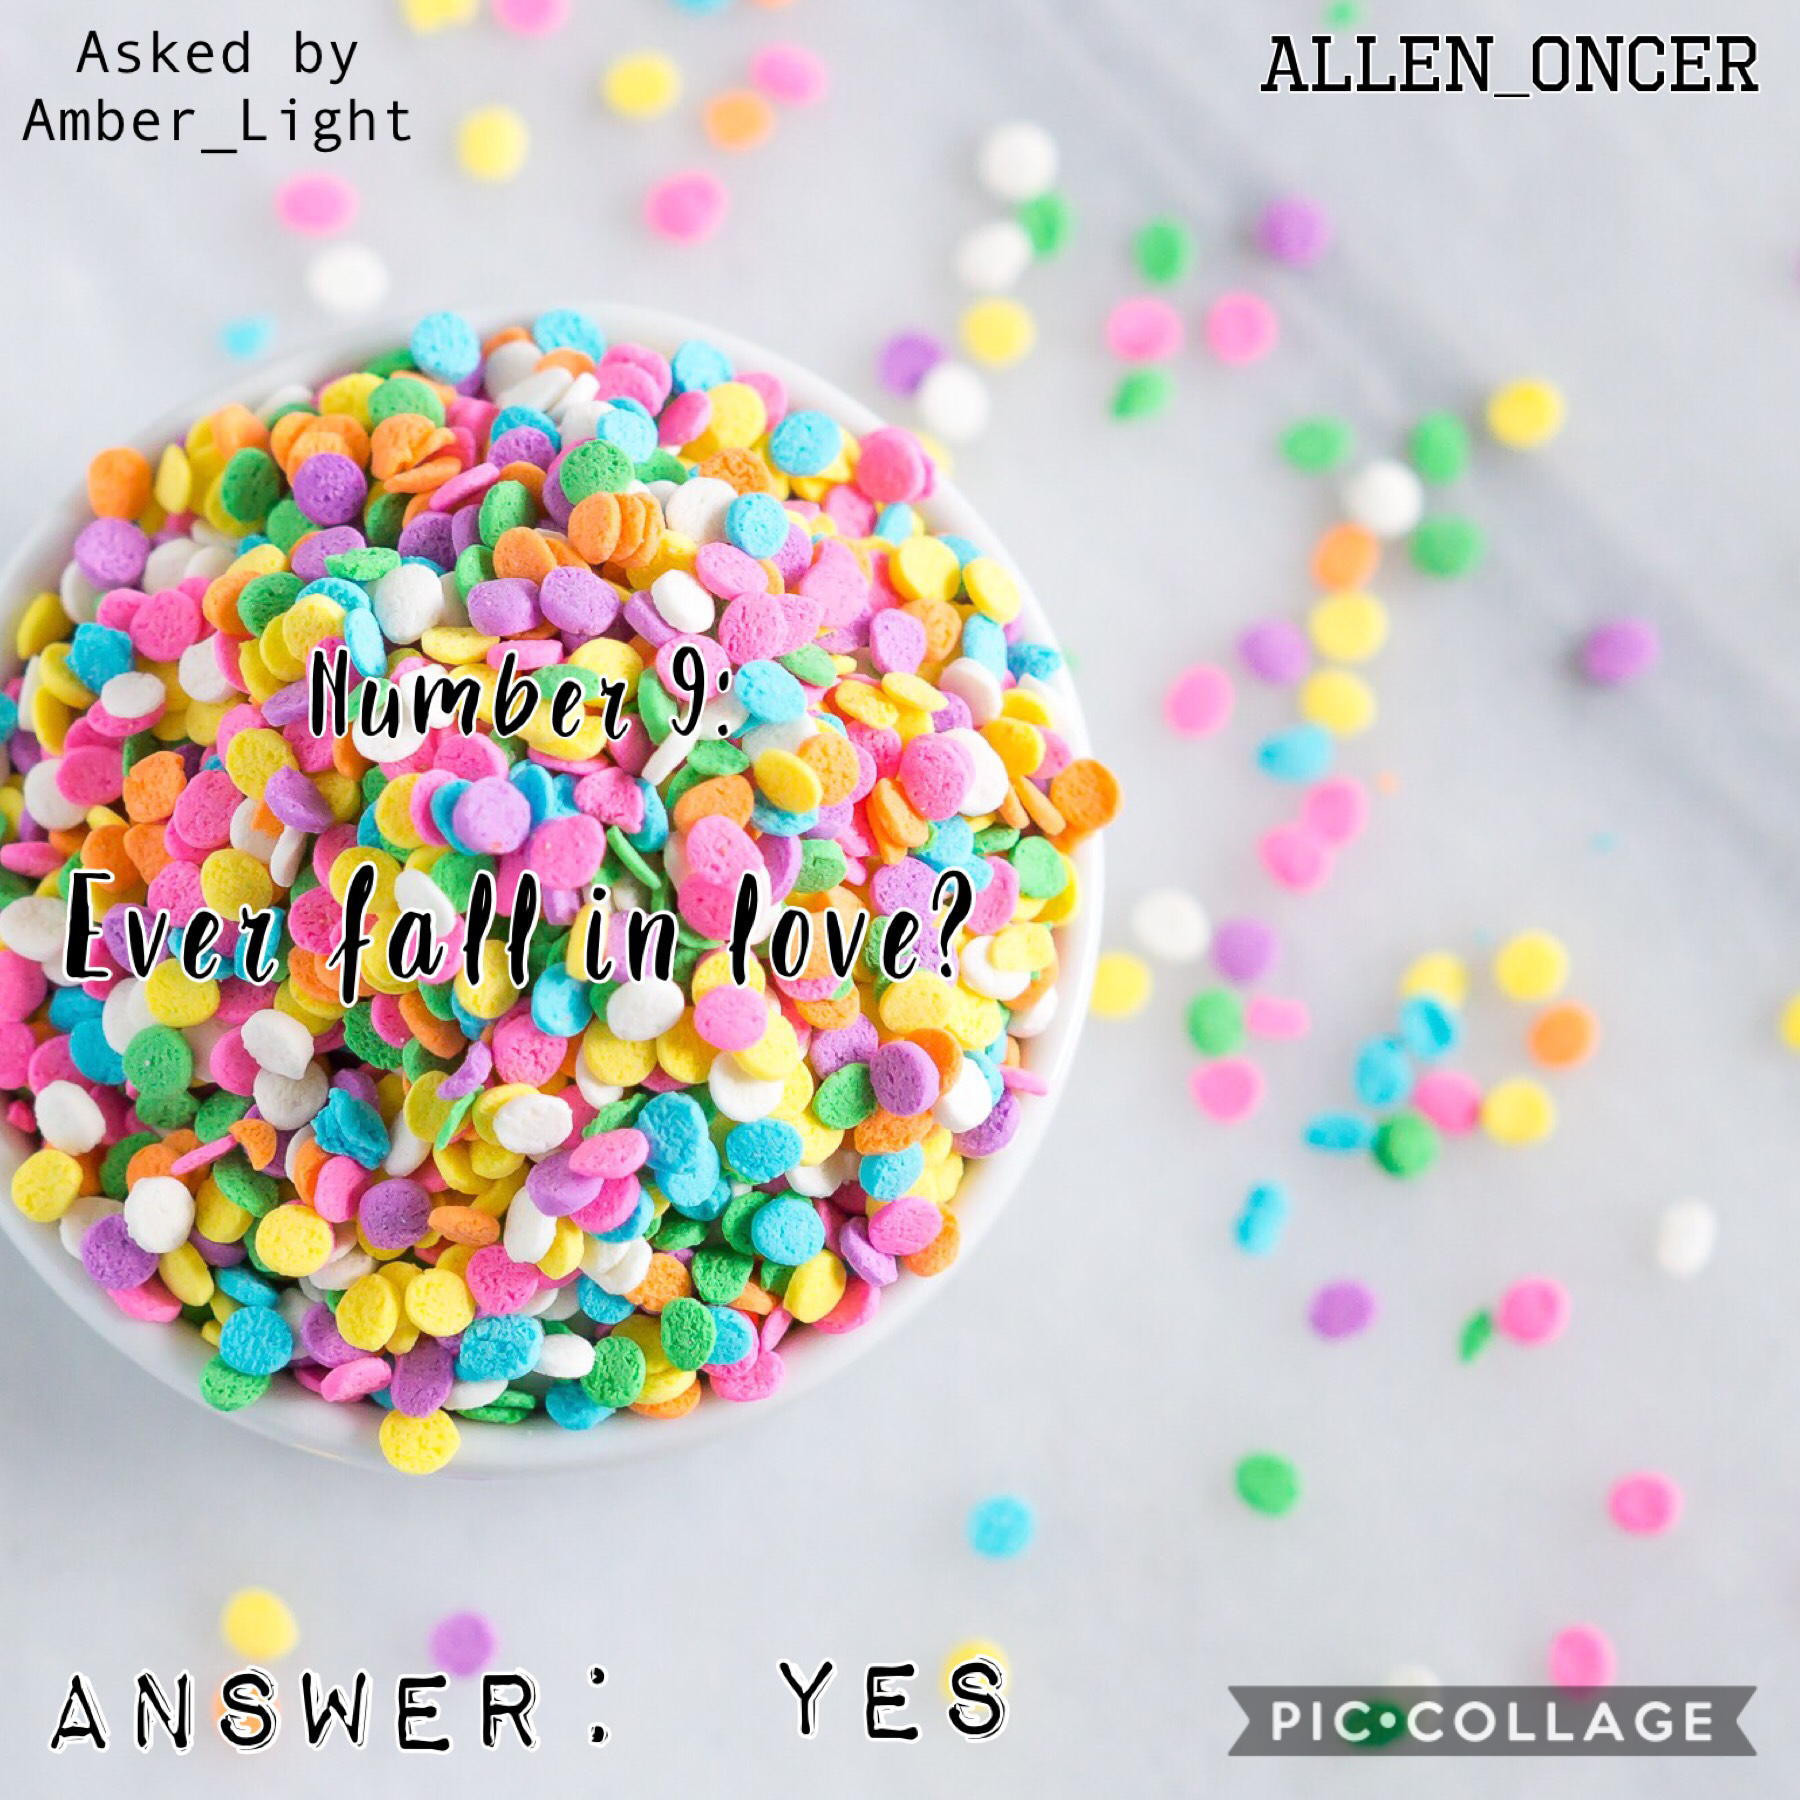 T a p 

Question asked by Amber_Light